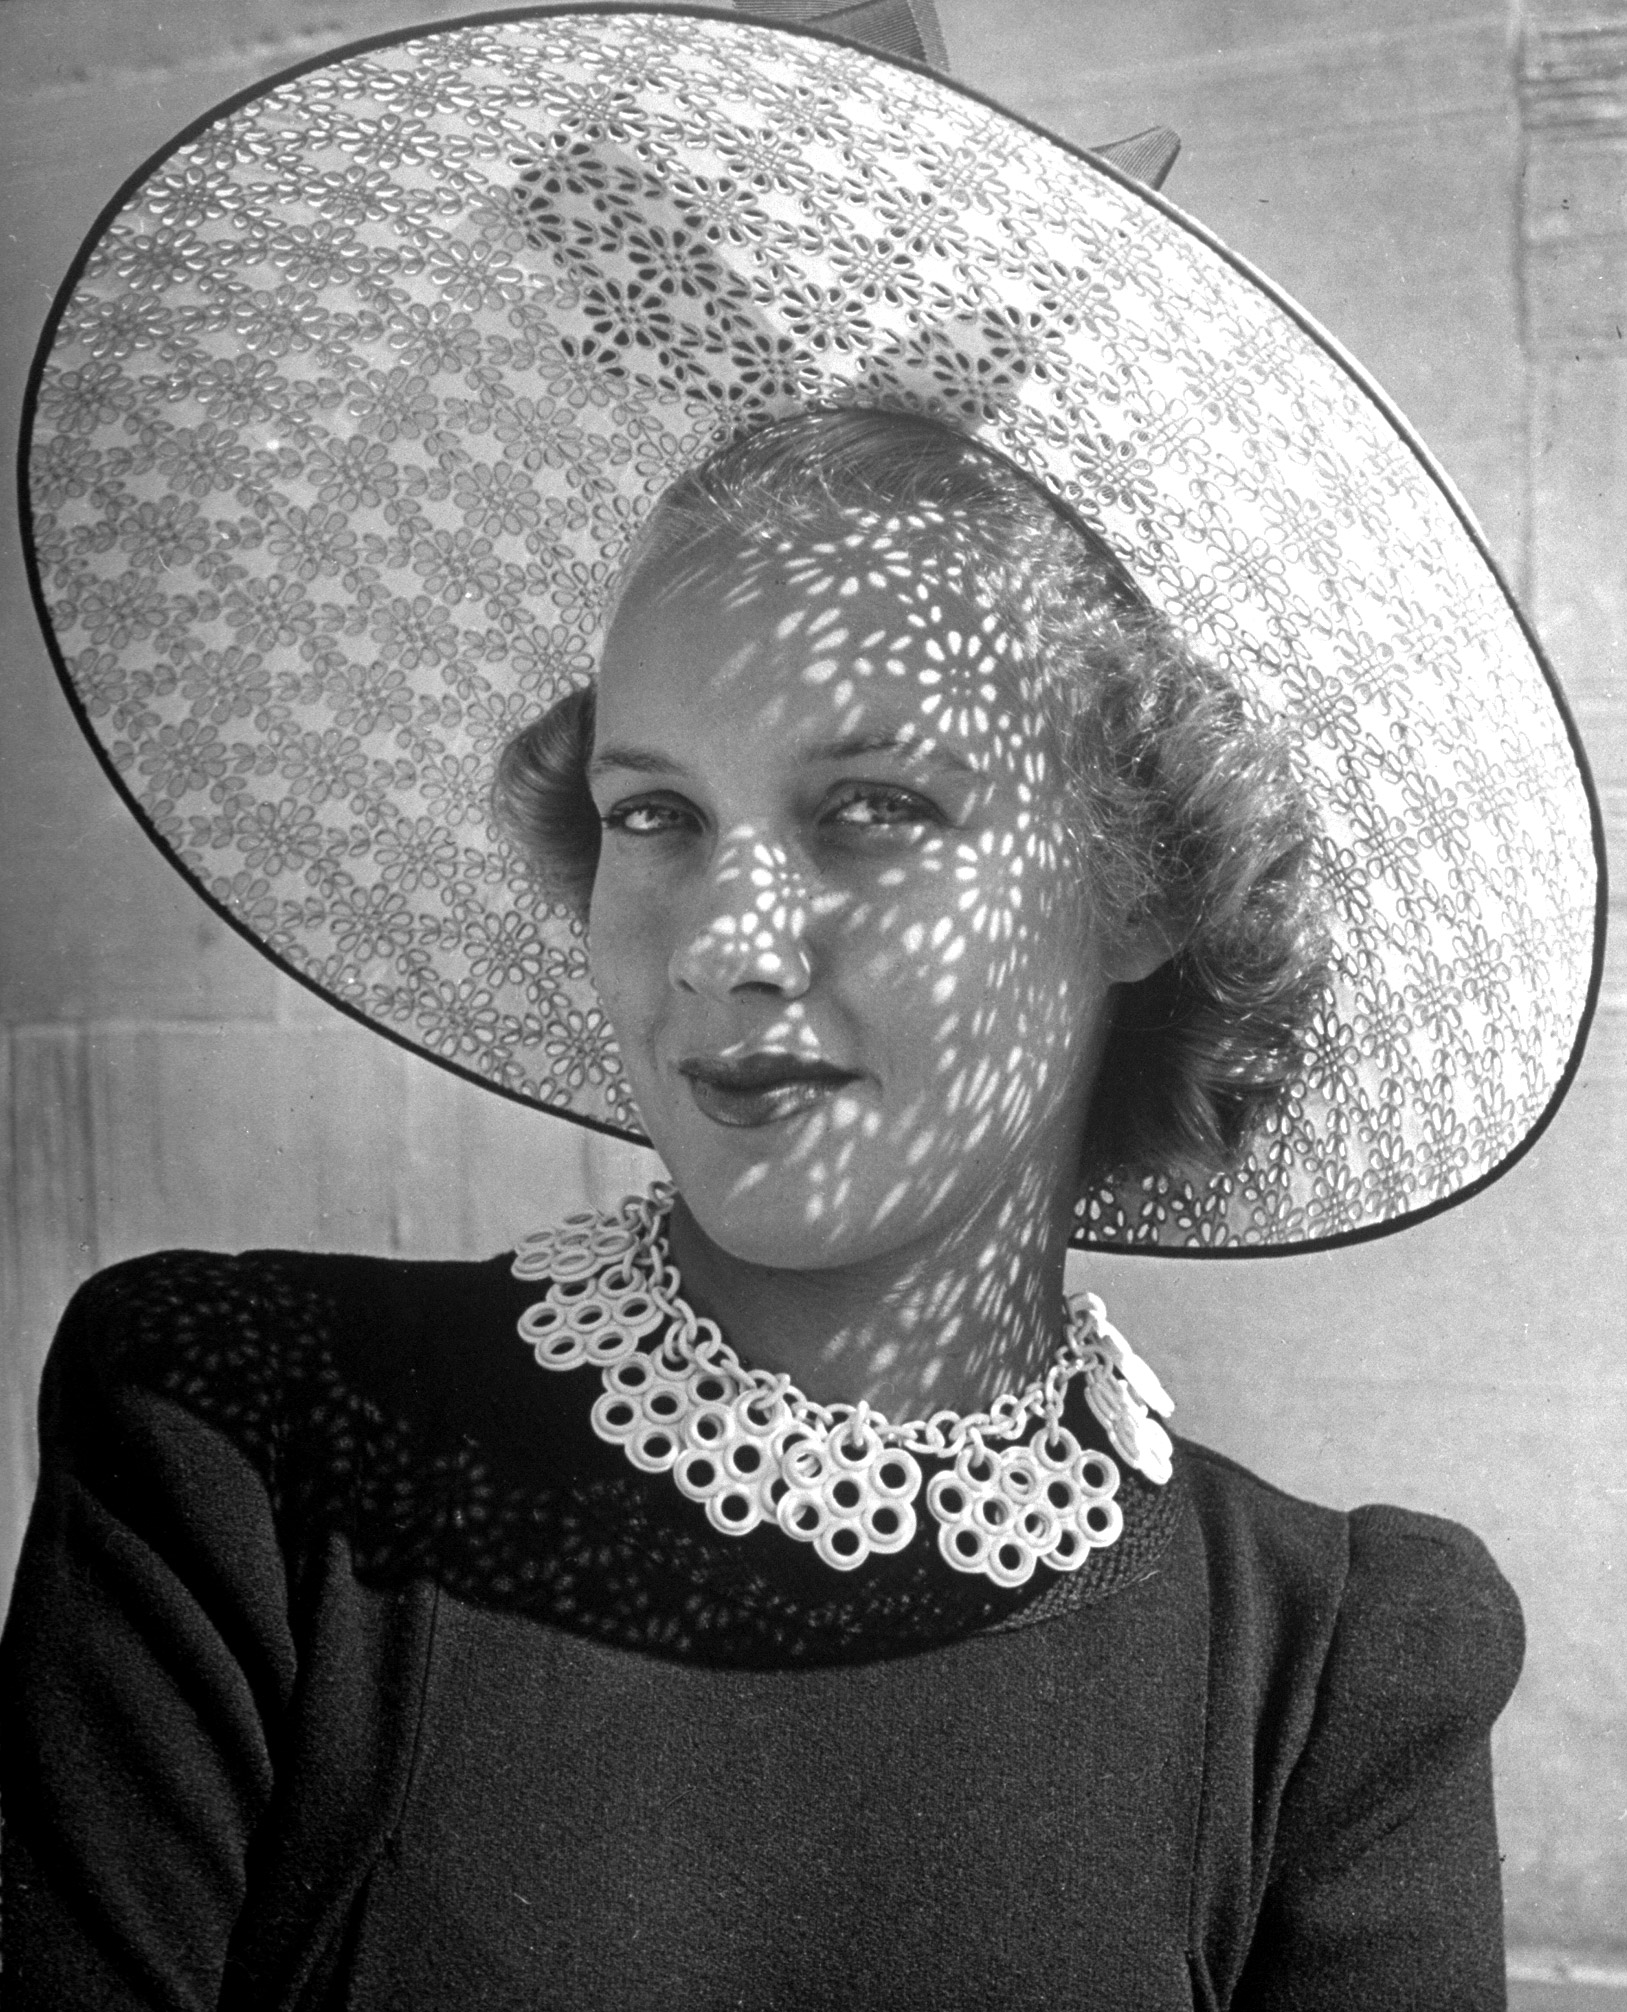 Revival of eyelet embroidery with a punched hole hat and necklace. 1940.